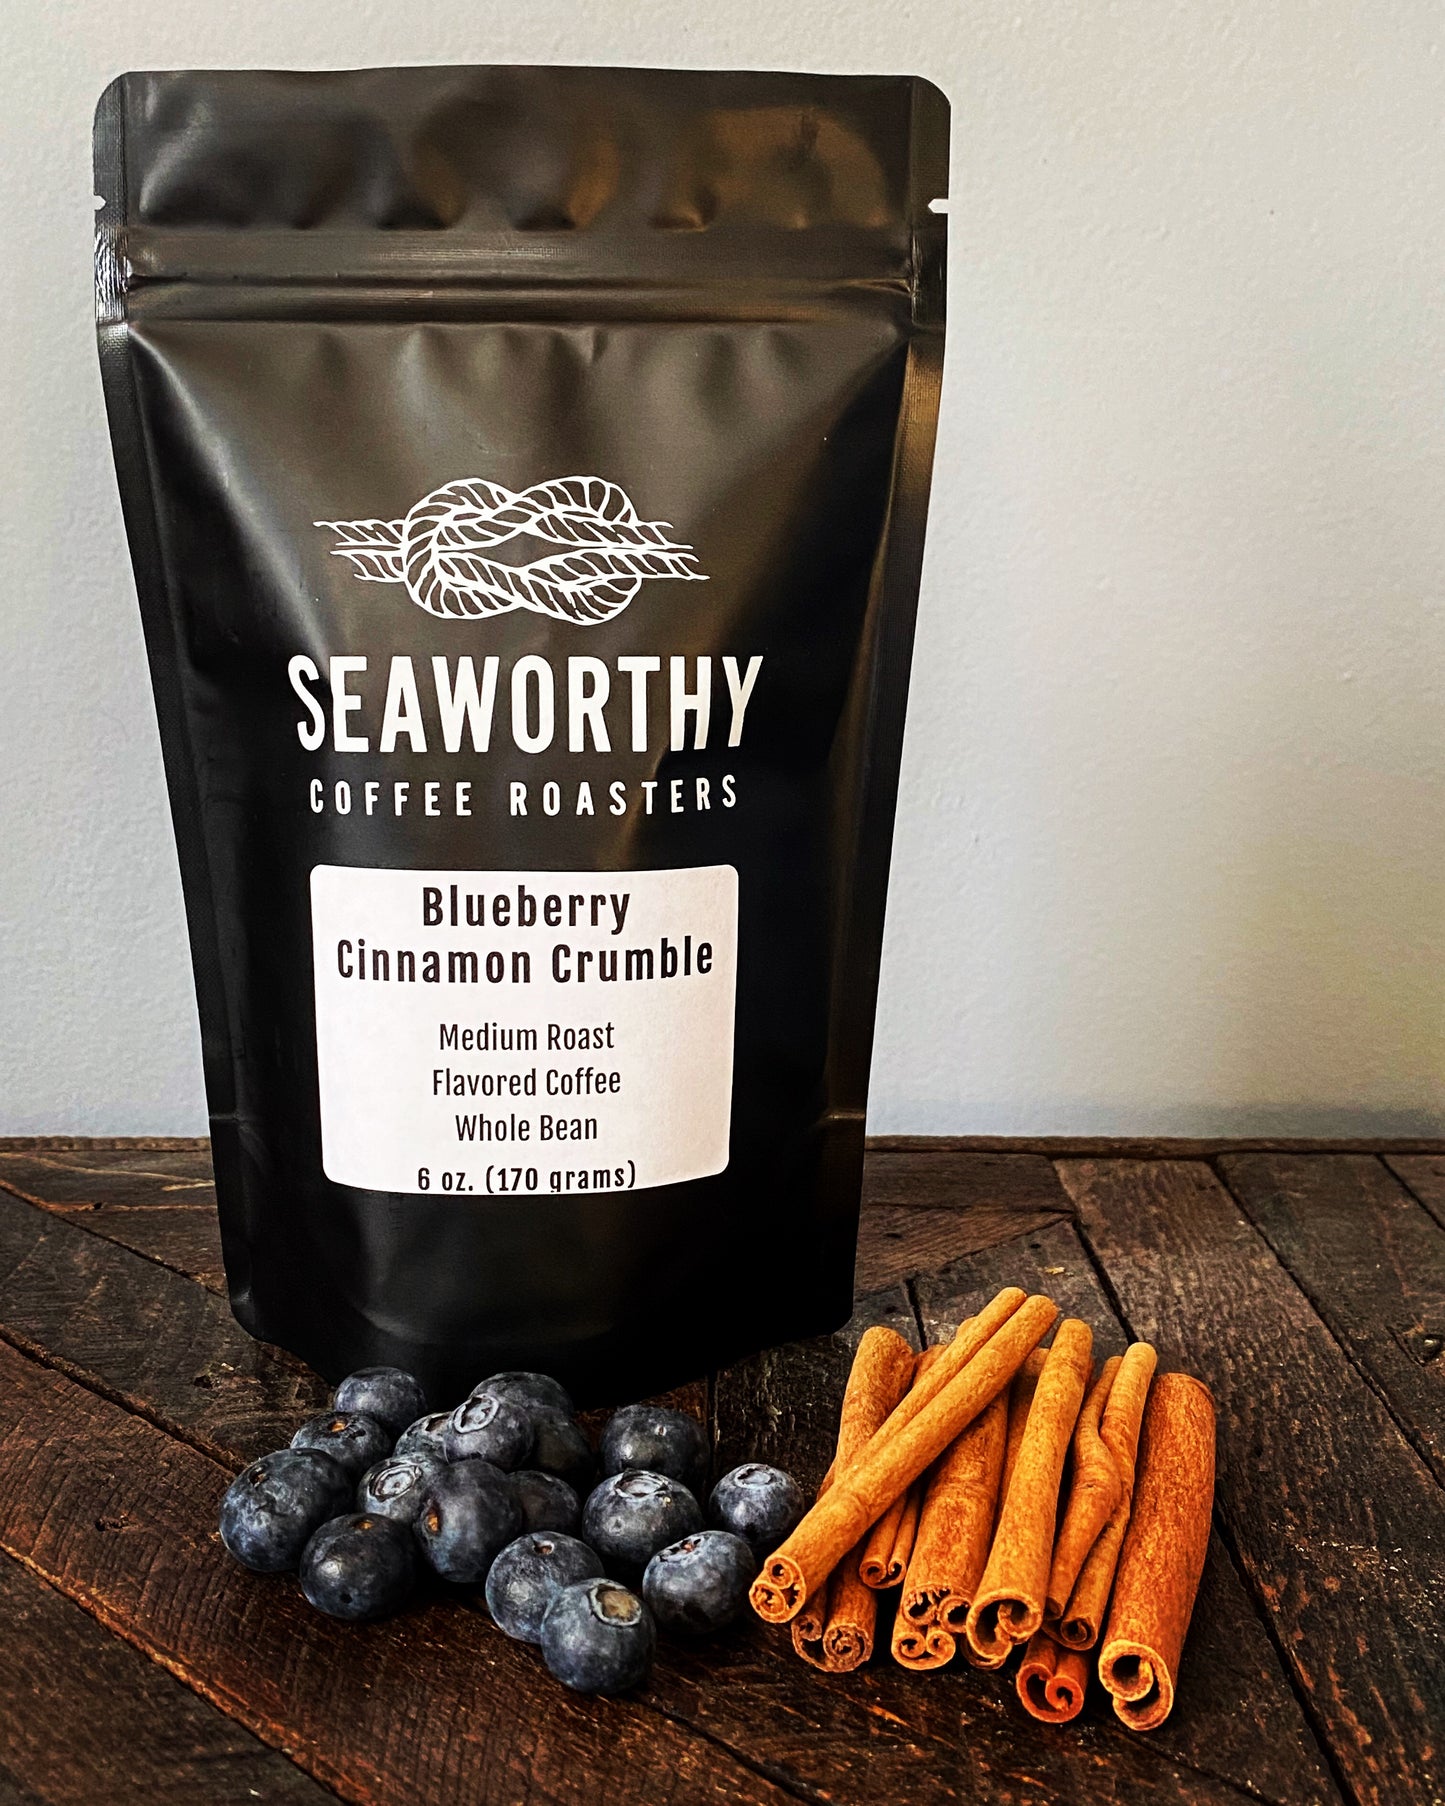 With the taste of fresh blueberries bursting at the seams and warm cinnamon crumble in the backdrop, Blueberry Cinnamon Crumble will have your senses captivated before you even open the bag! *Allergen Free